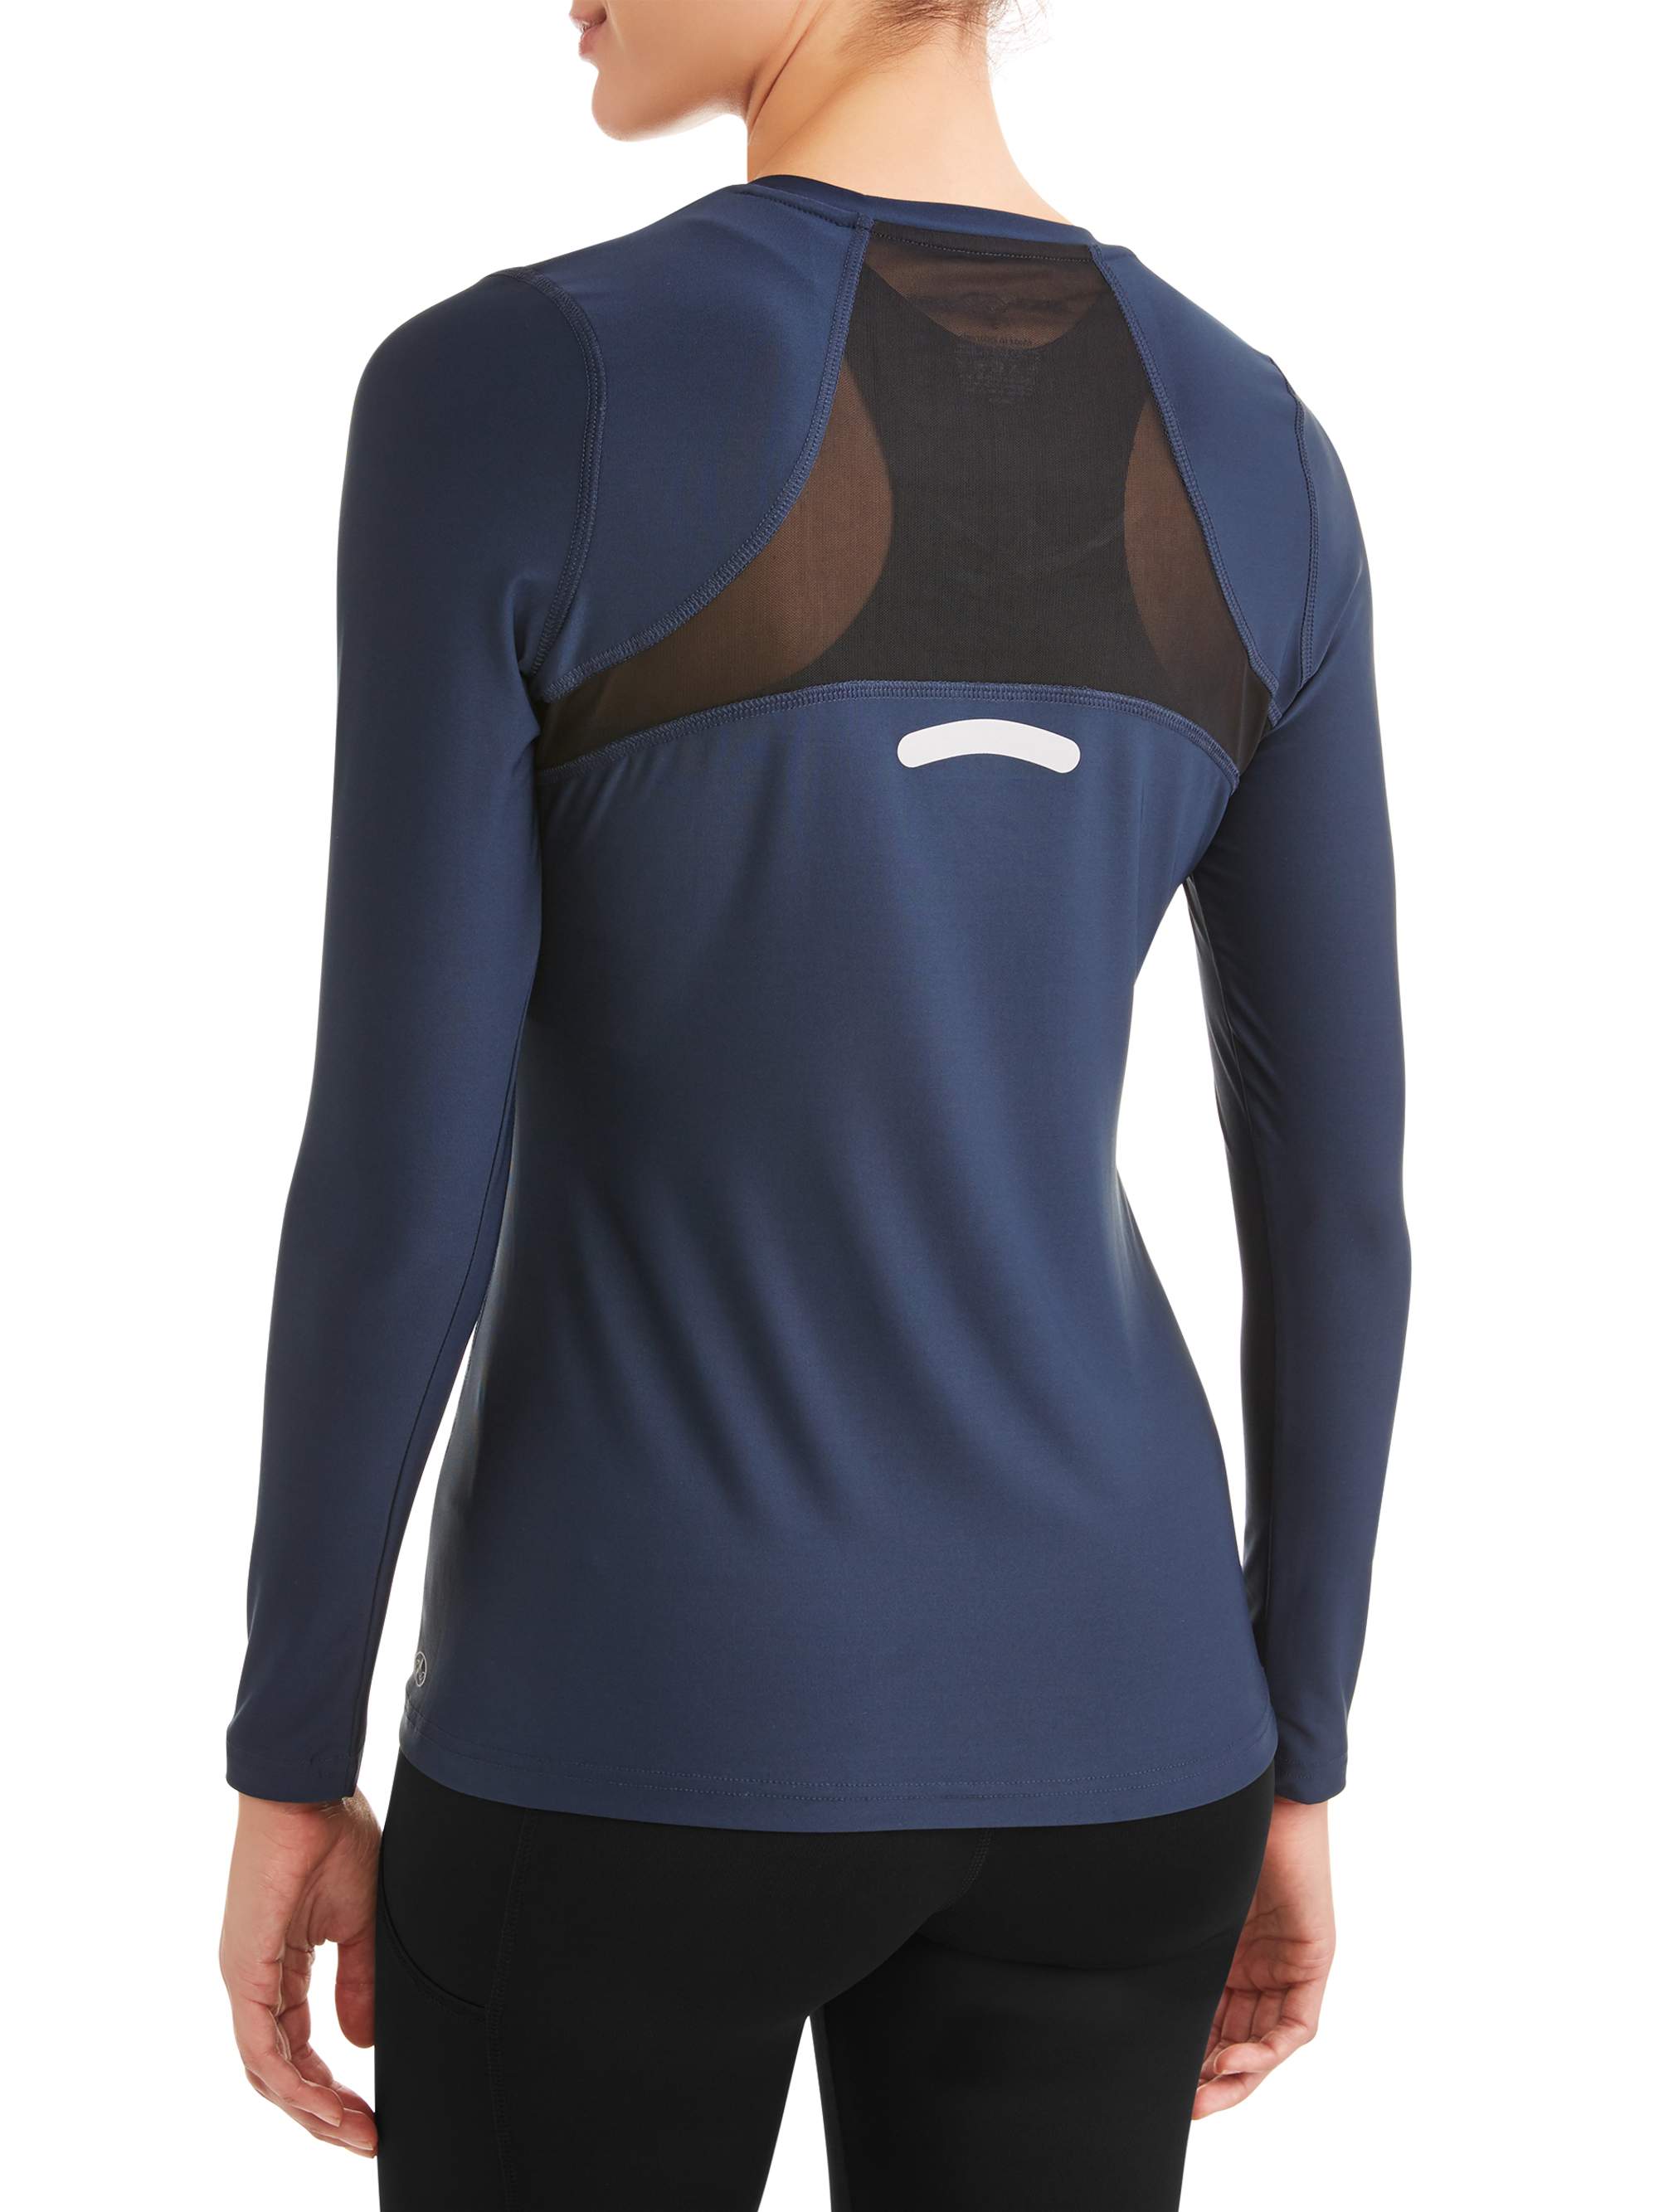 New York Laundry Women’s Active Long Sleeve V-Neck Mesh Top - image 1 of 4